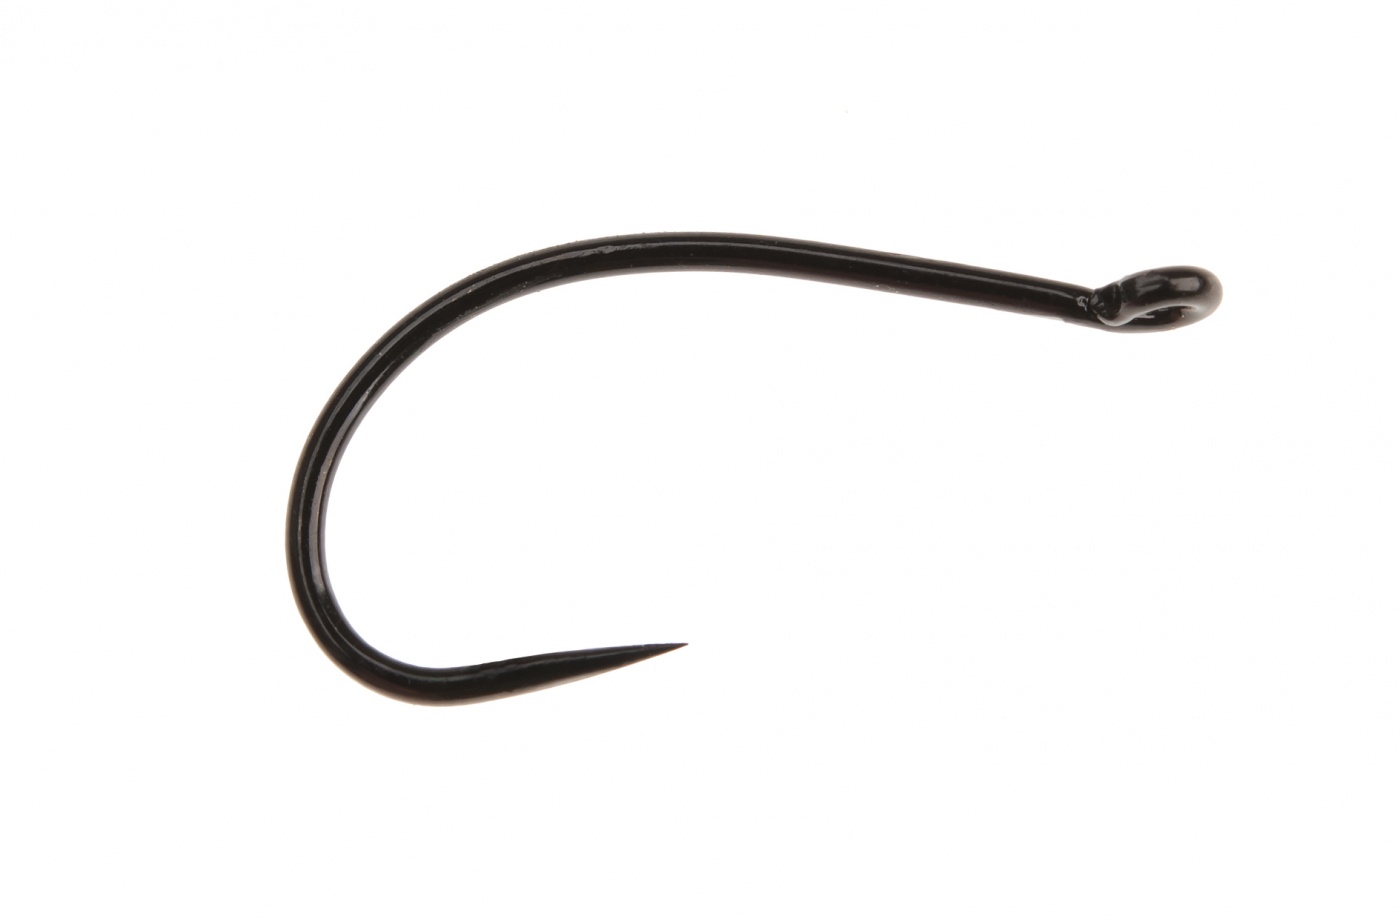 Ahrex Fw521 Emerger Hook Barbless #14 Trout Fly Tying Hooks